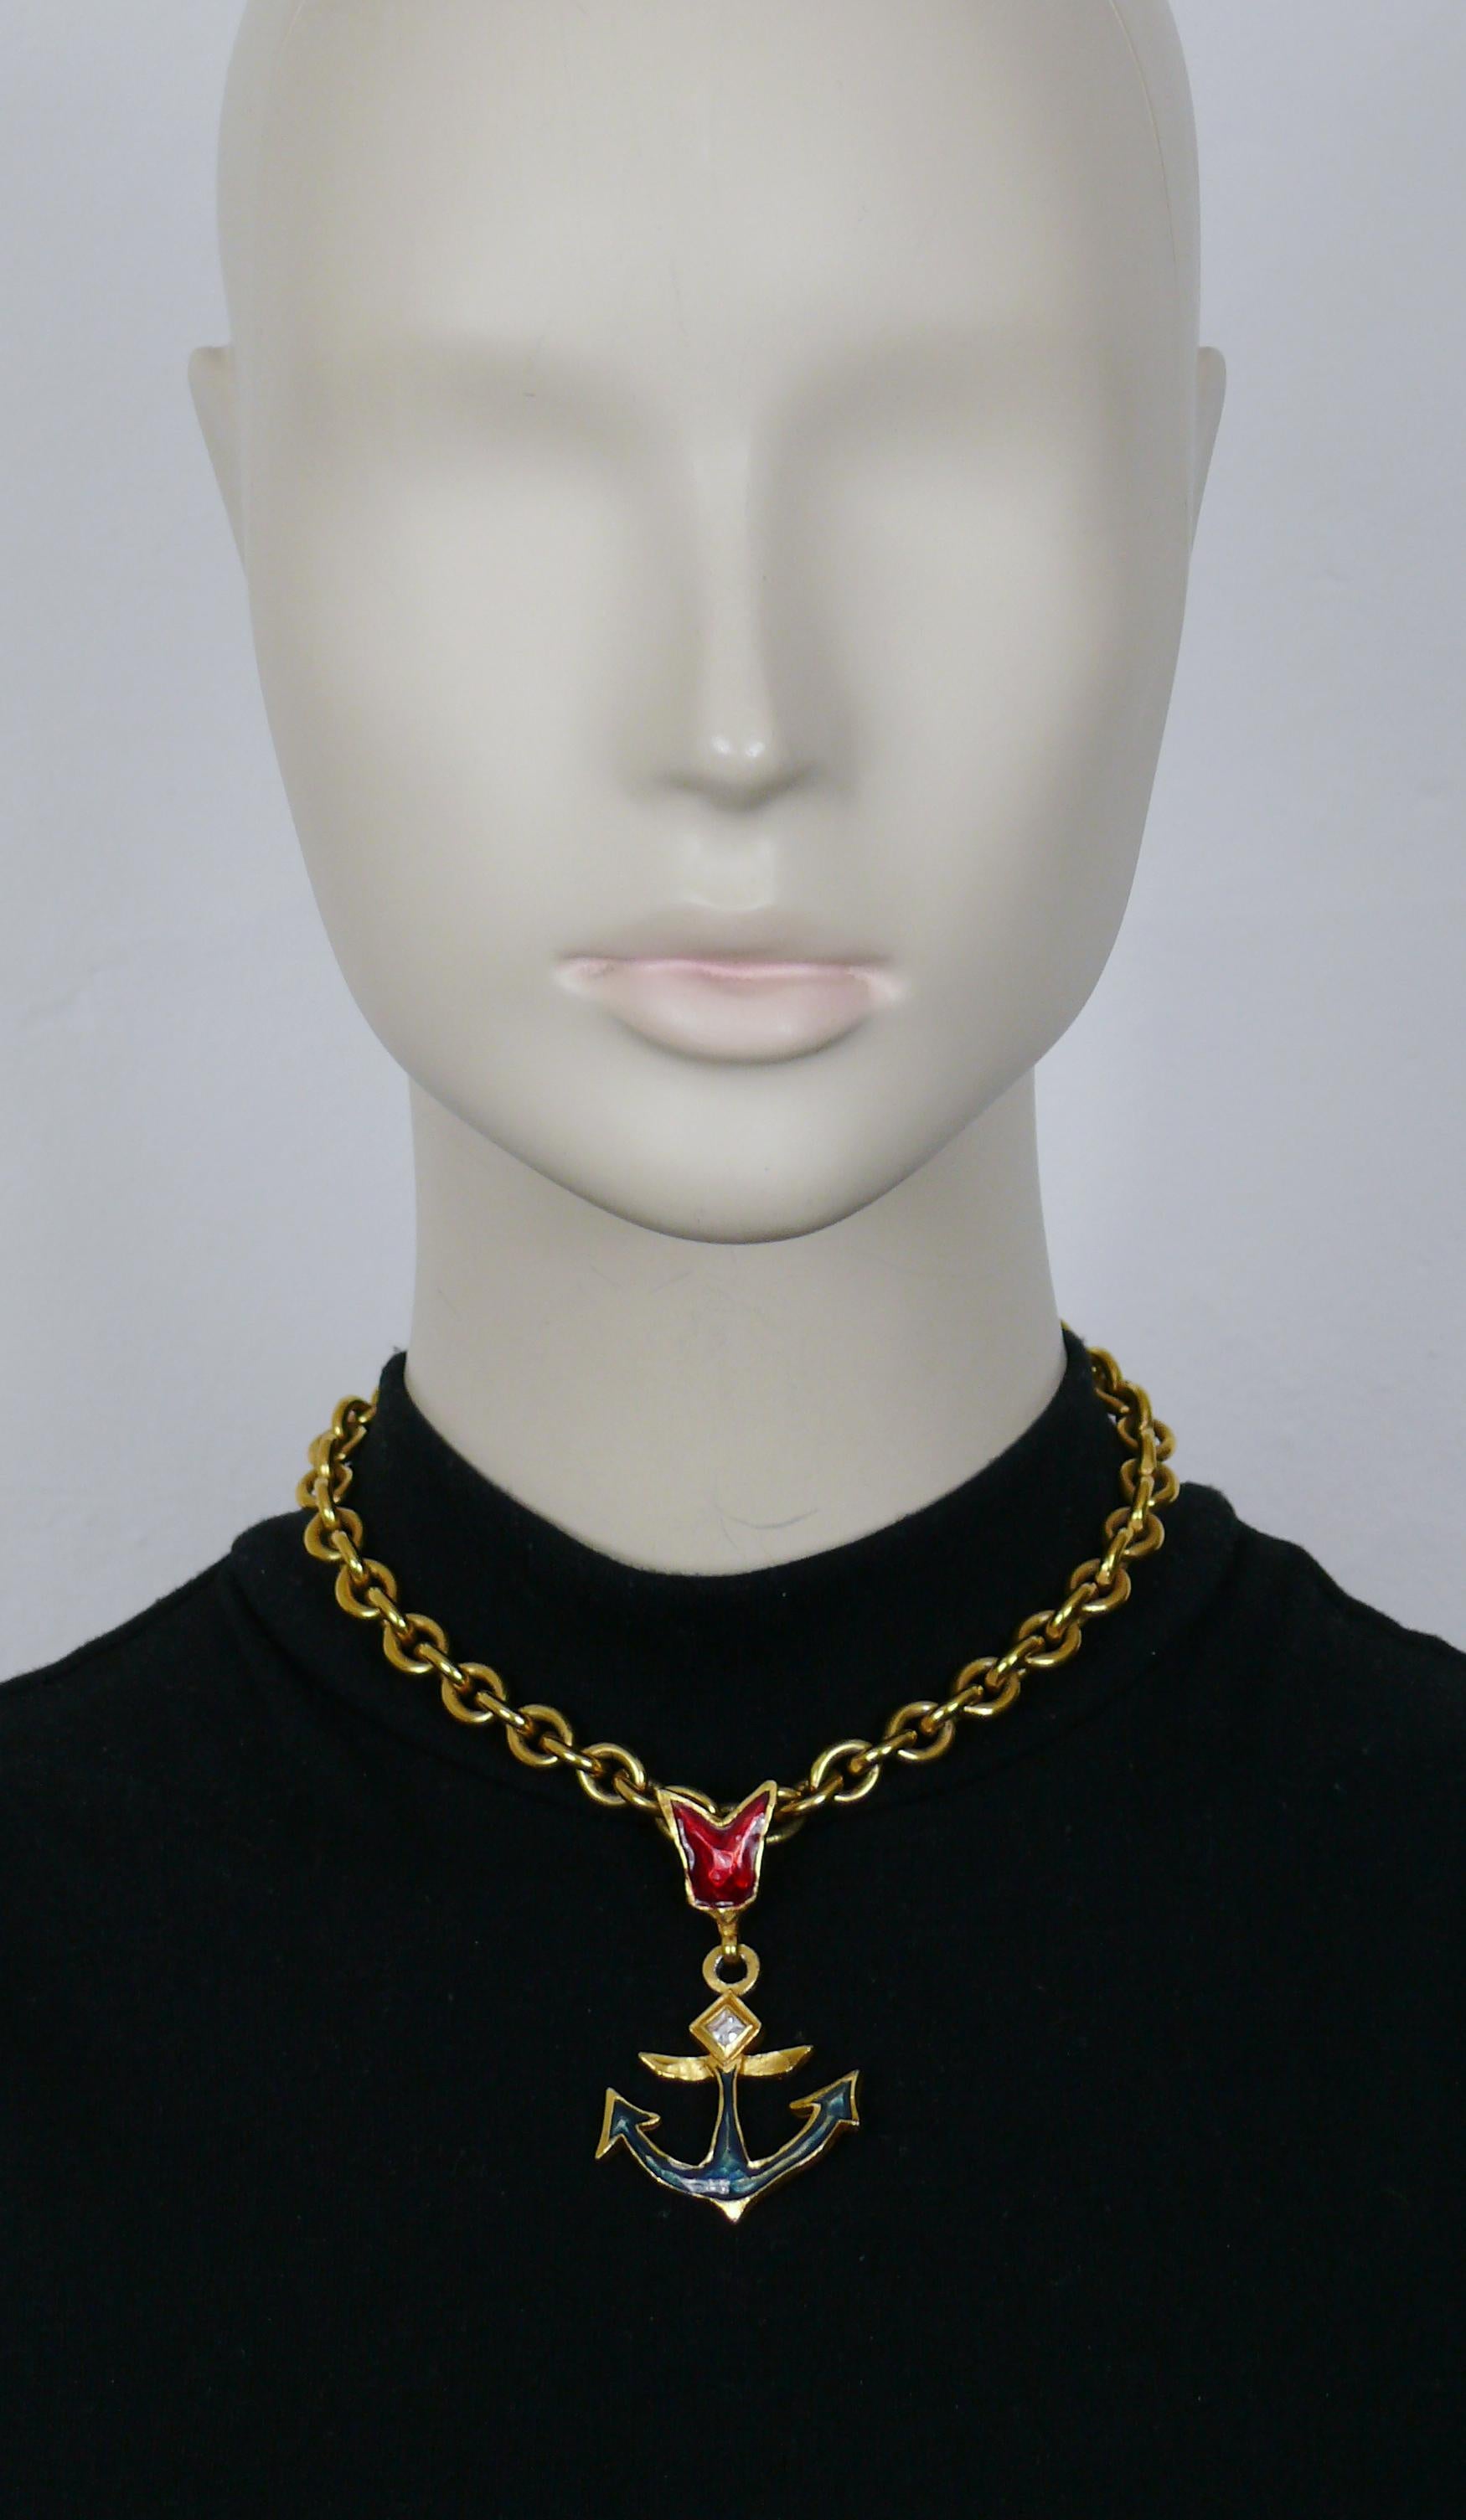 CHRISTIAN LACROIX vintage gold tone chain necklace featuring a enameled anchor pendant.

Adjustable hook clasp closure.

Marked CHRISTIAN LACROIX CL Made in France.

Indicative measurements : chain length from approx. 35.5 cm (13.98 inches) to